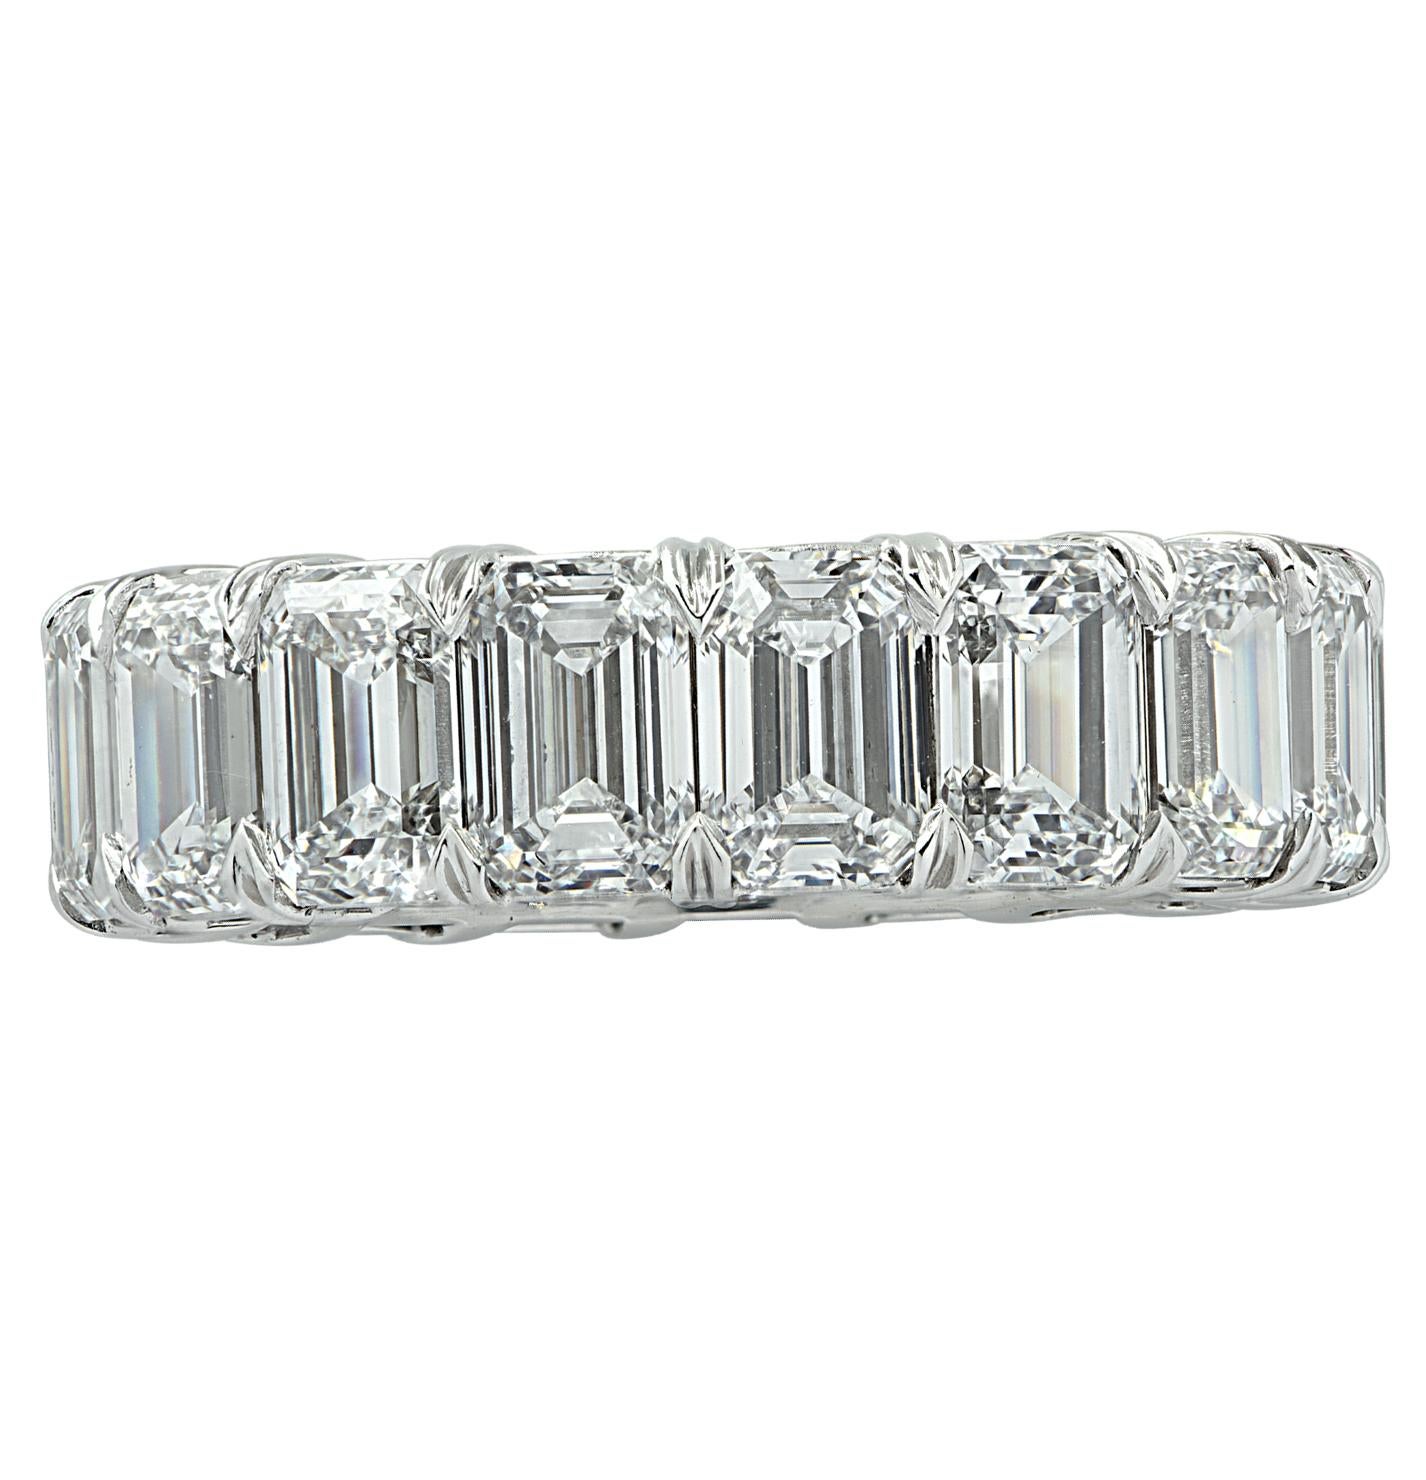 Vivid Diamonds eternity band crafted by hand in platinum, showcasing 17 spectacular GIA certified emerald cut diamonds weighing 8.63 carats total, D-E color, VVS1- VS1 clarity. Each diamond was carefully selected, perfectly matched and set in a